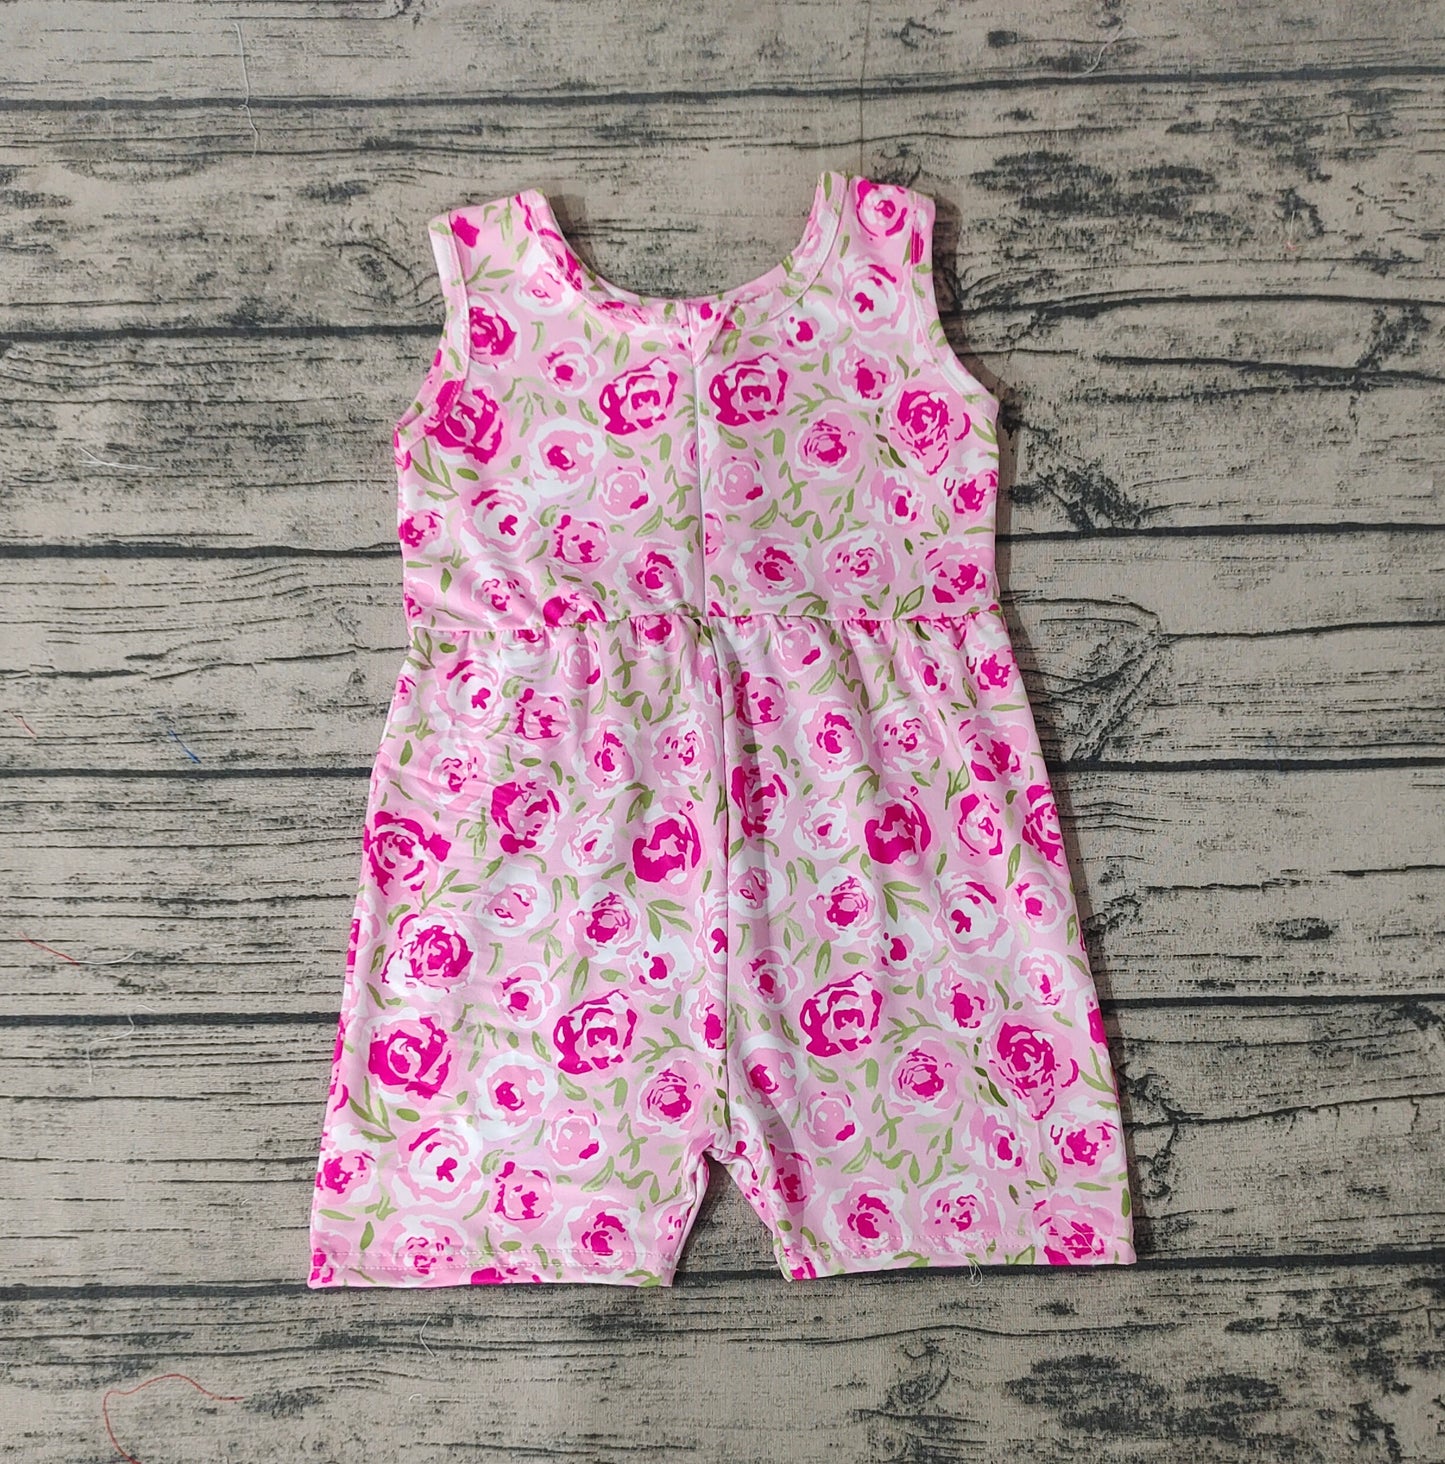 Baby Girls Pink Floral Sleeveless Shorts Jumpsuits